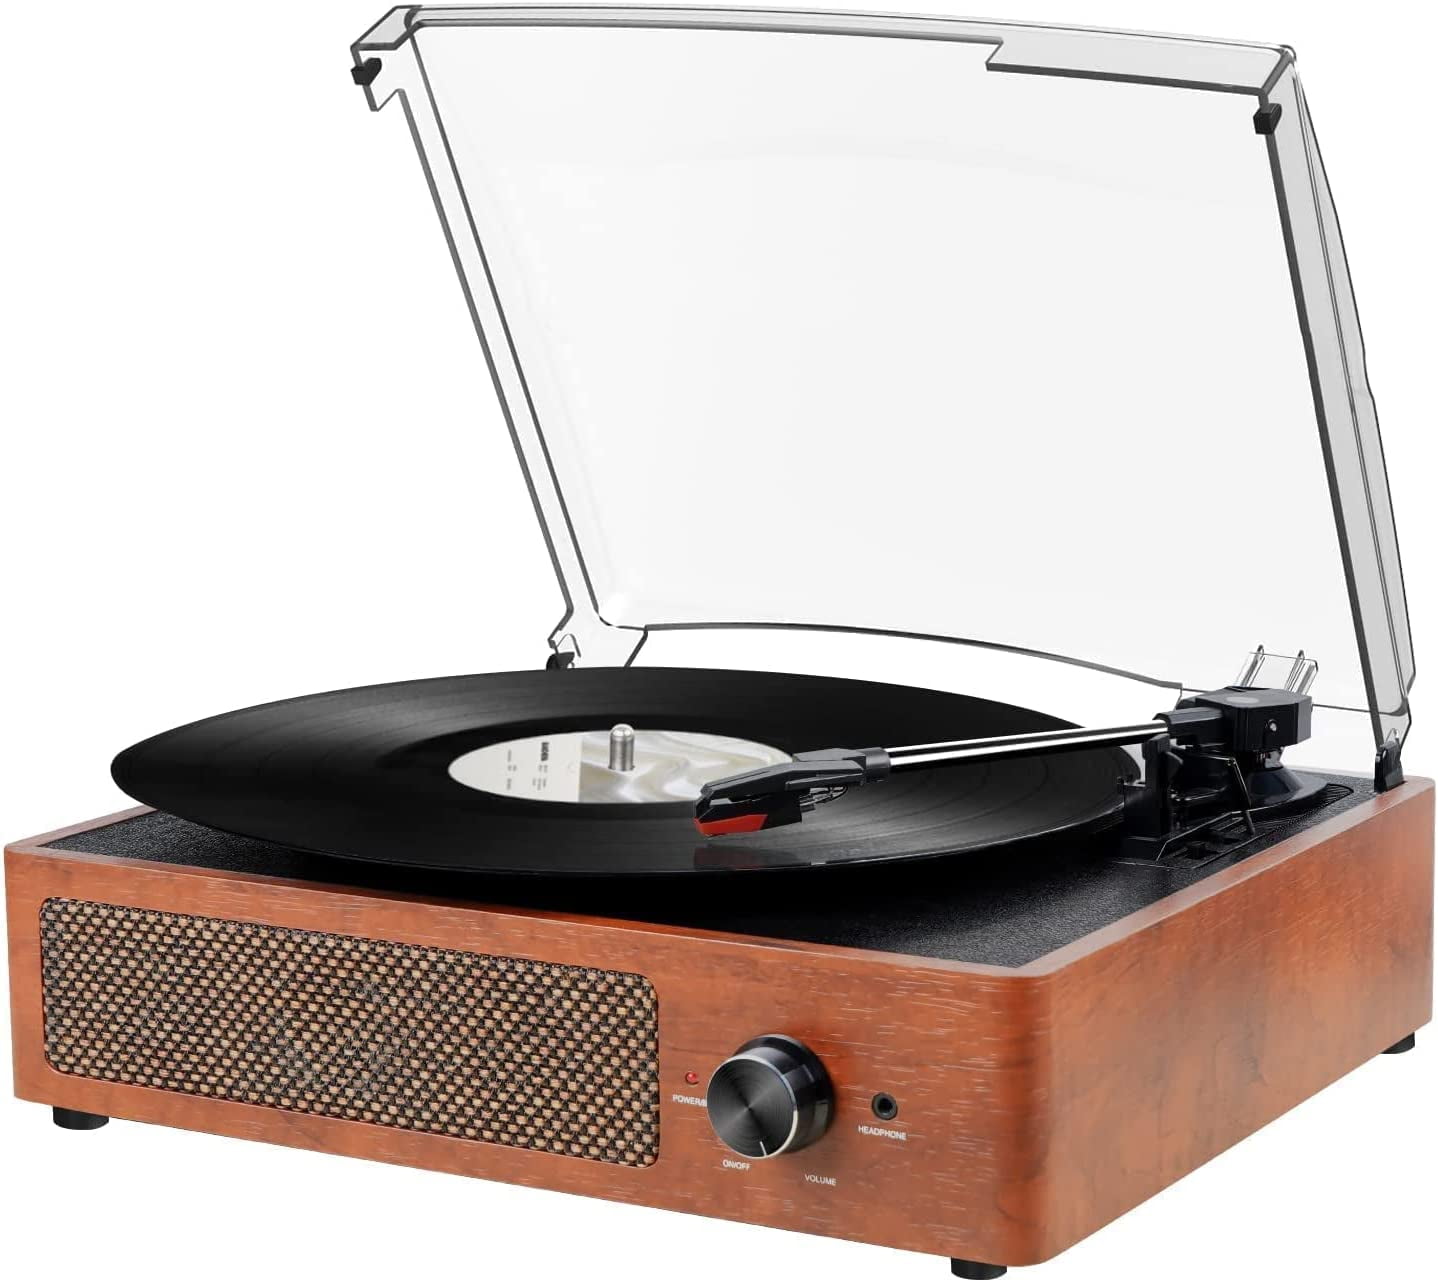 DIGITNOW Bluetooth Record Player with Built-in UK